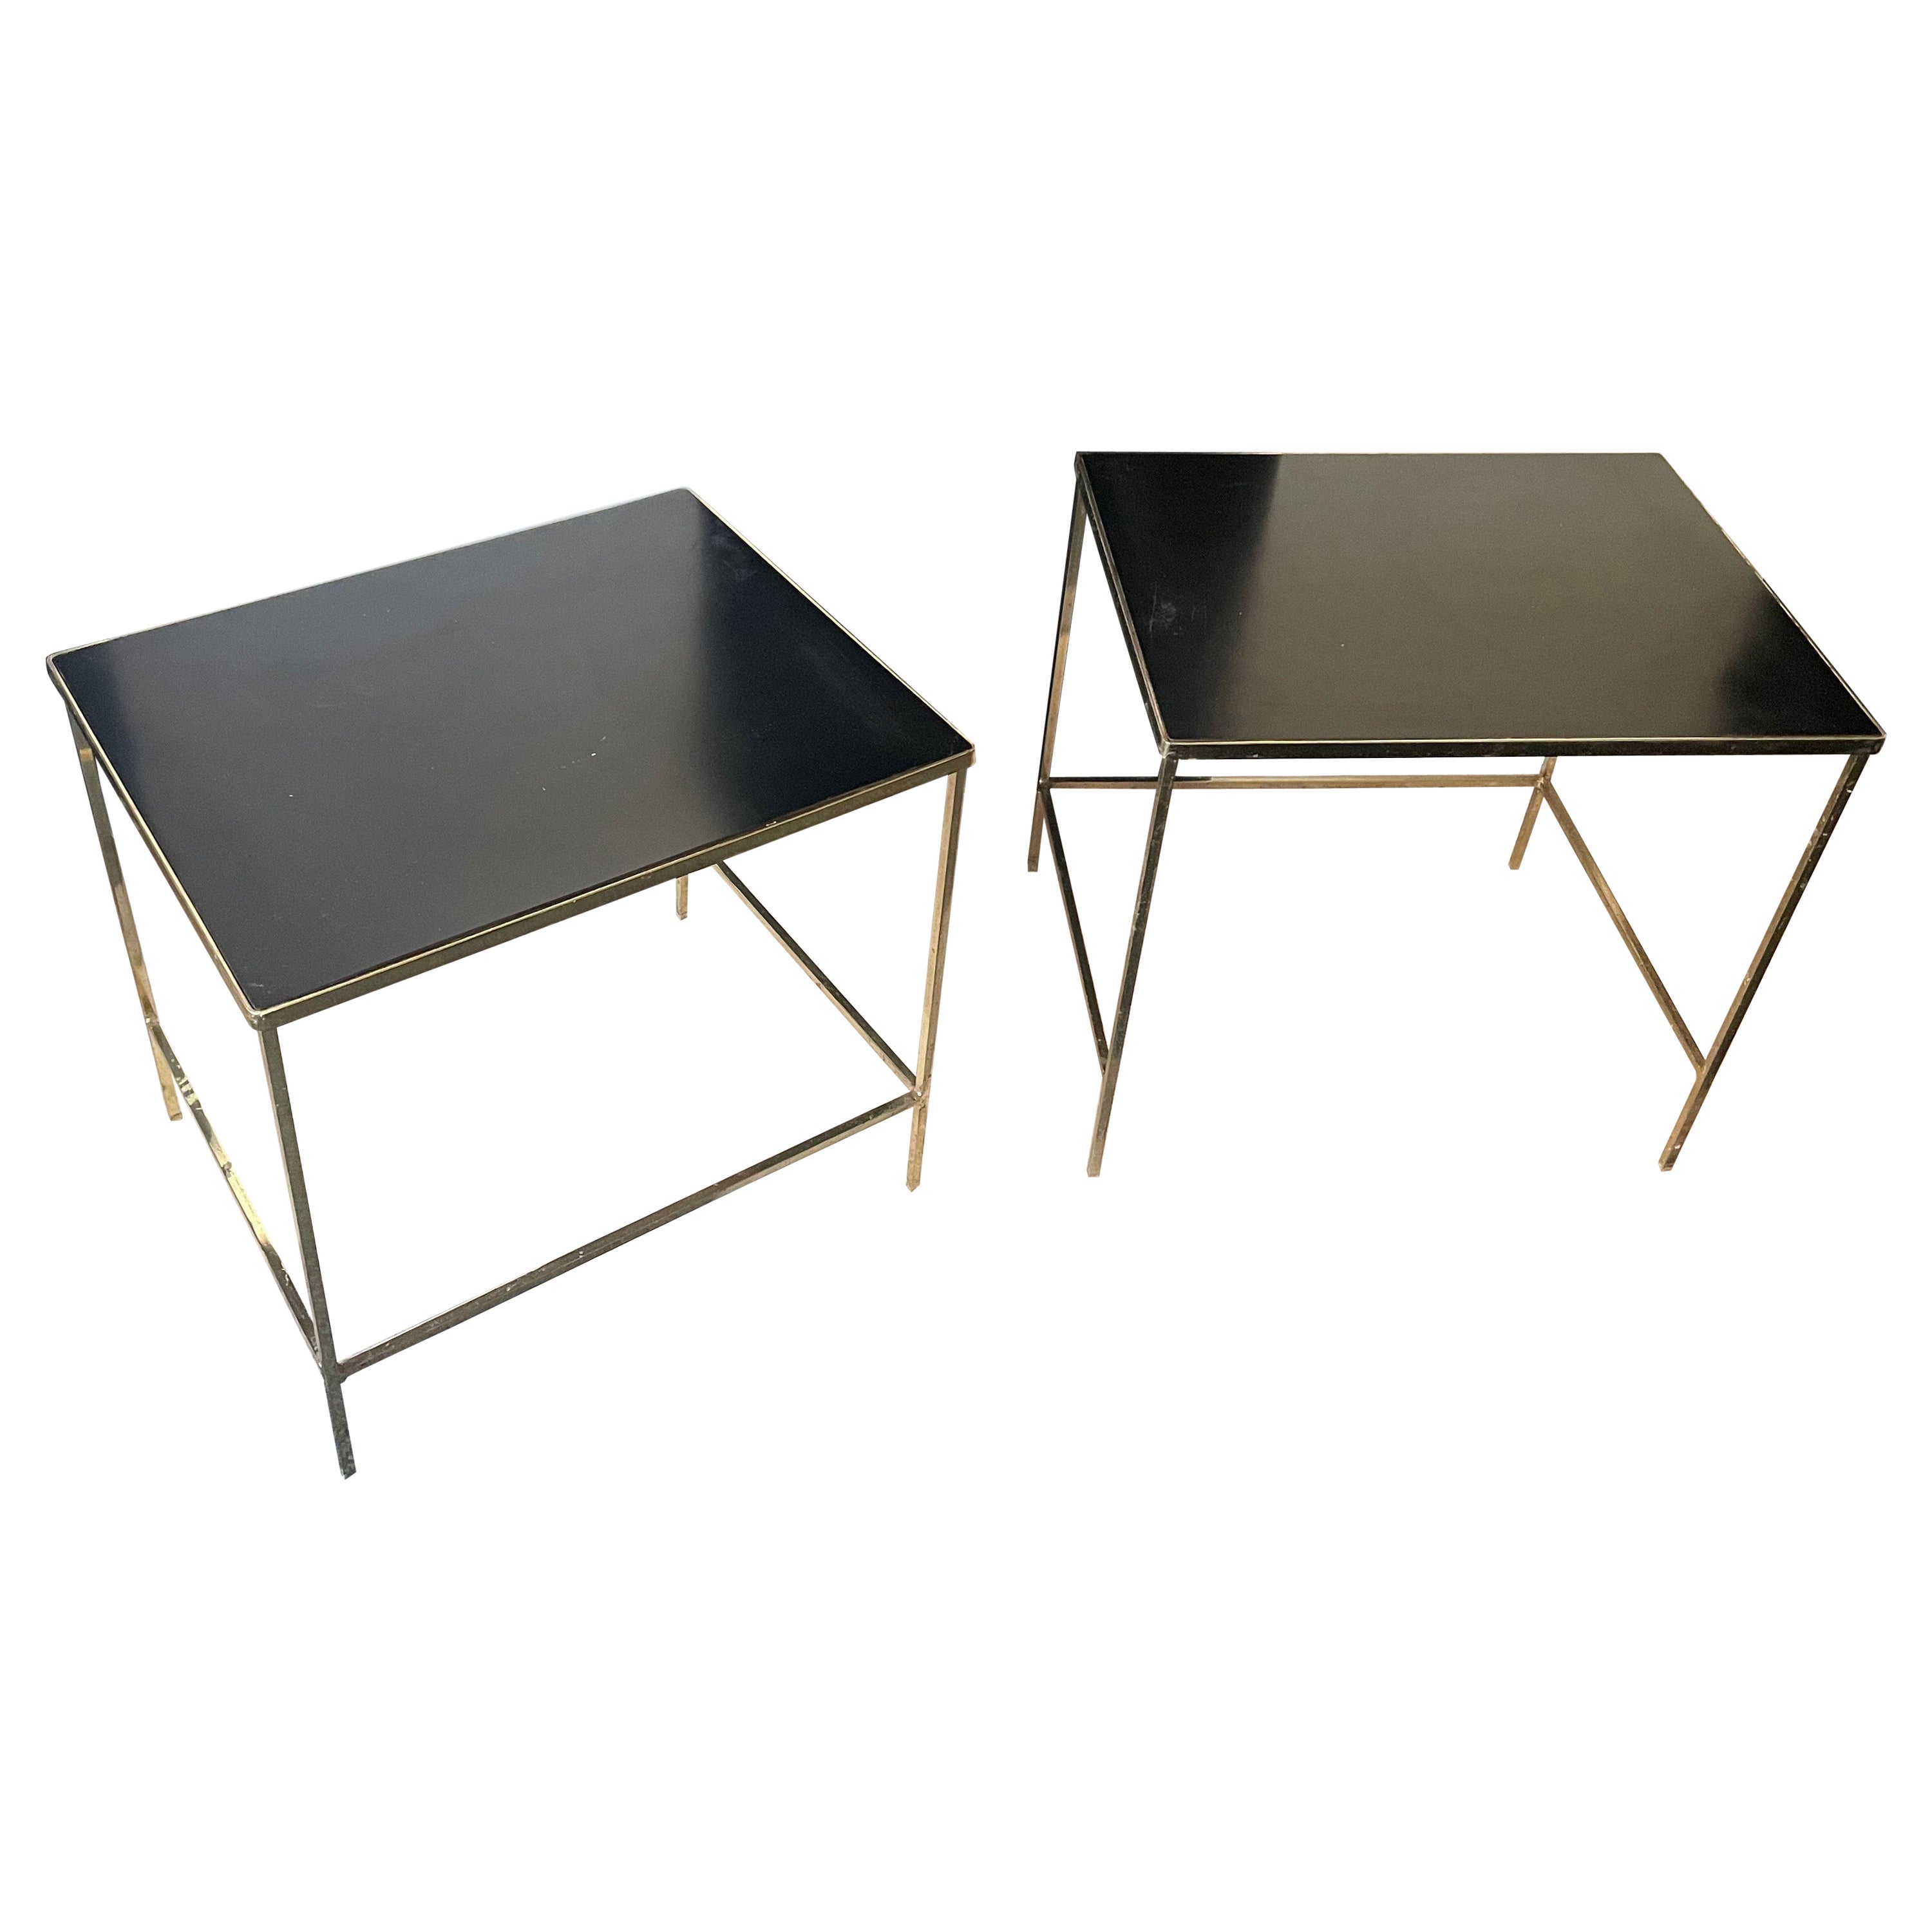 Pair of Minimalist Gilt Side Tables with Black Formica Tops, France, 1970 For Sale